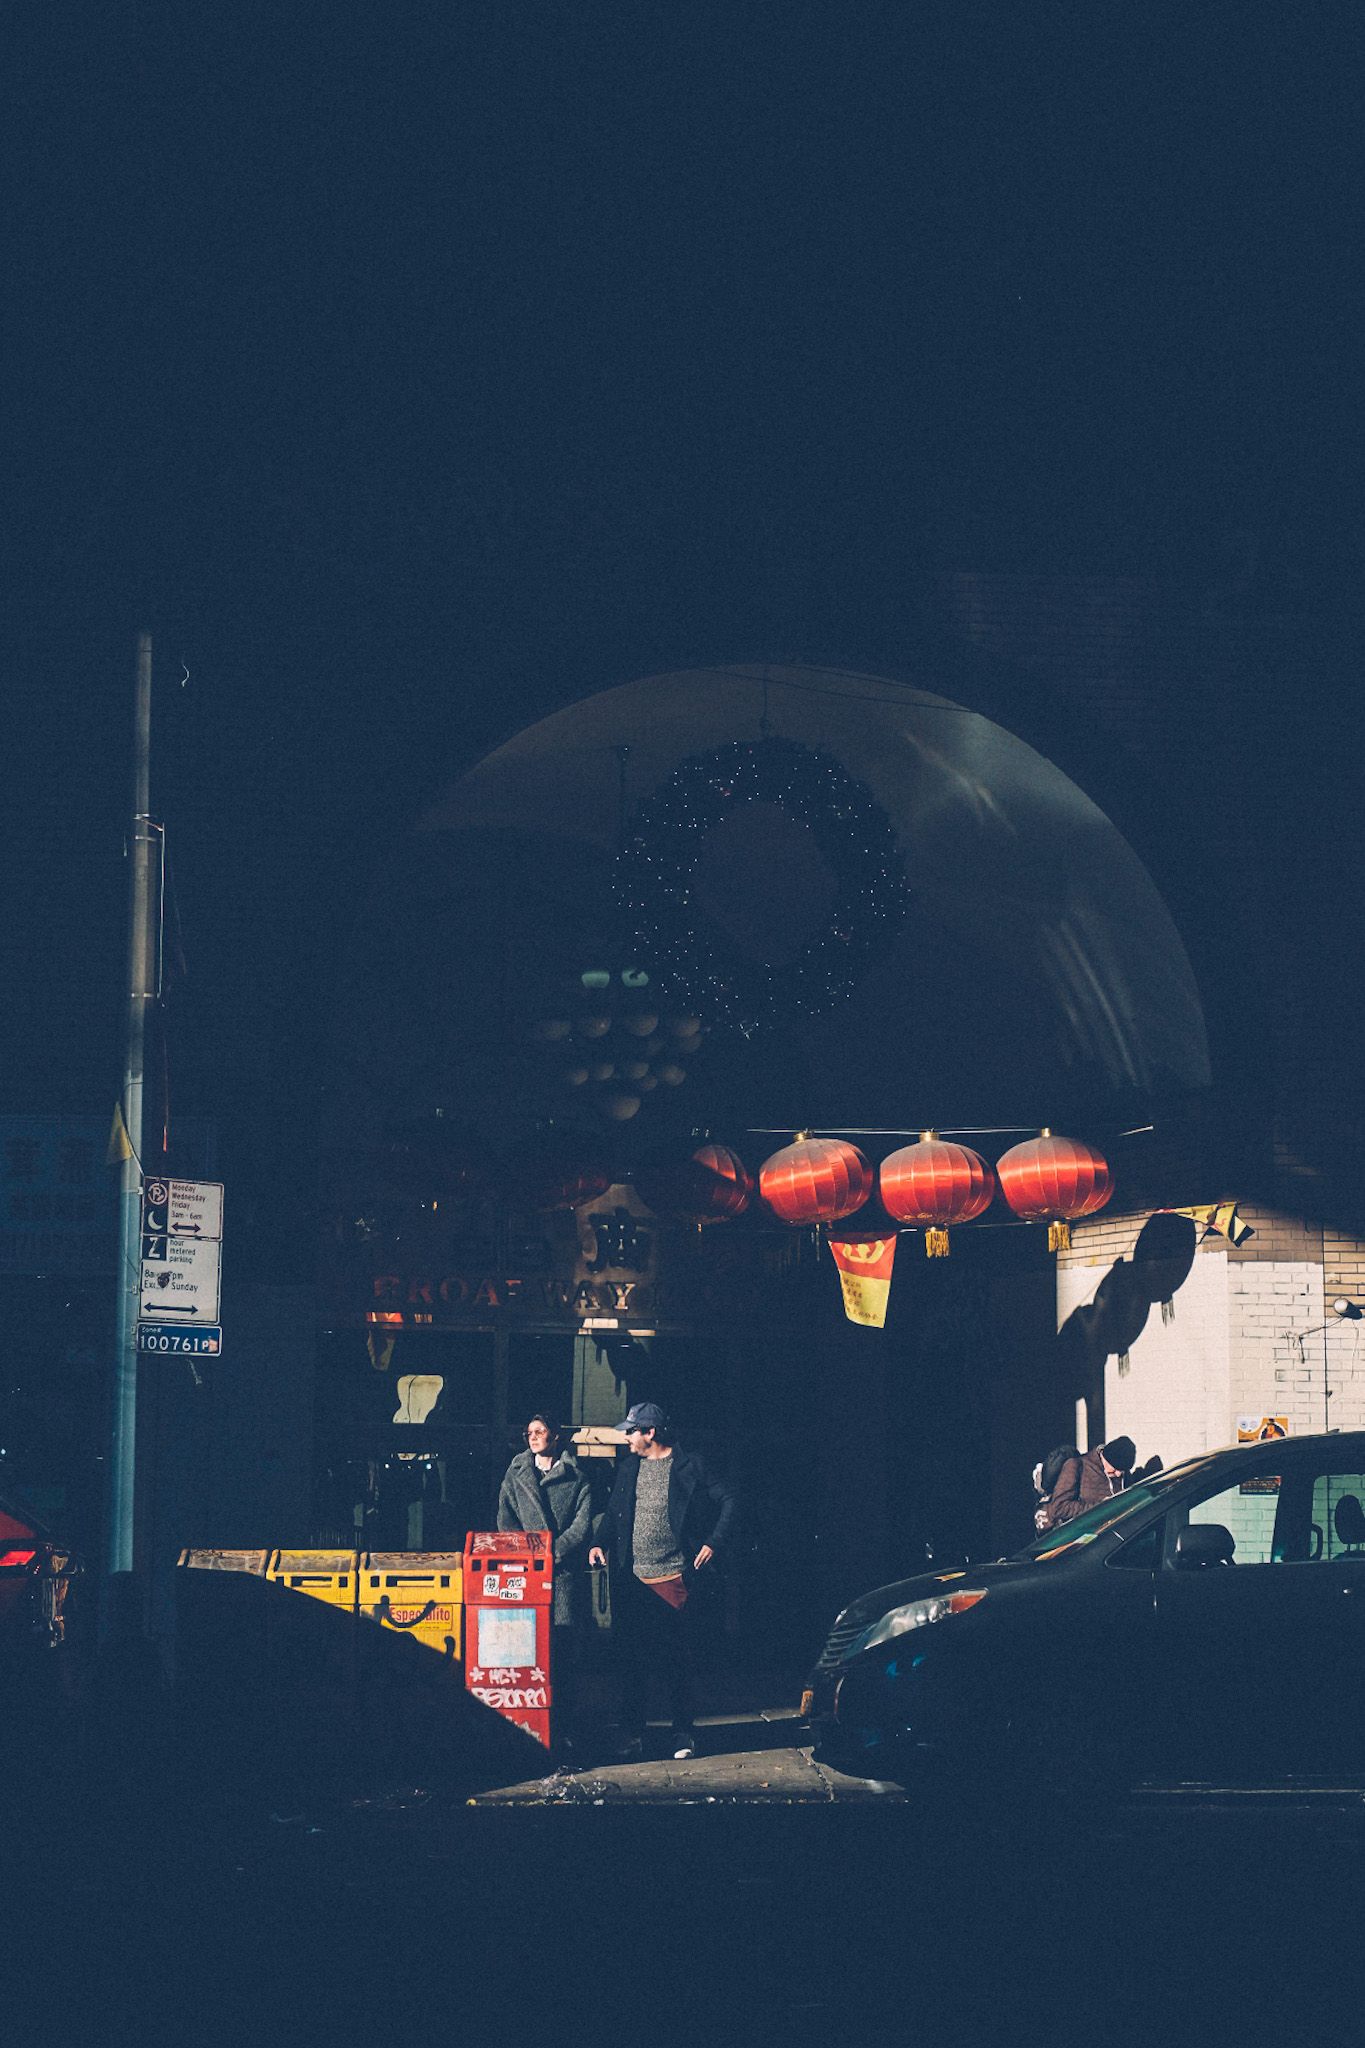 Two people emerge from the East Broadway Mall in Chinatown, New York, mostly cast in shadow with red paper lanterns catching the strip of light.